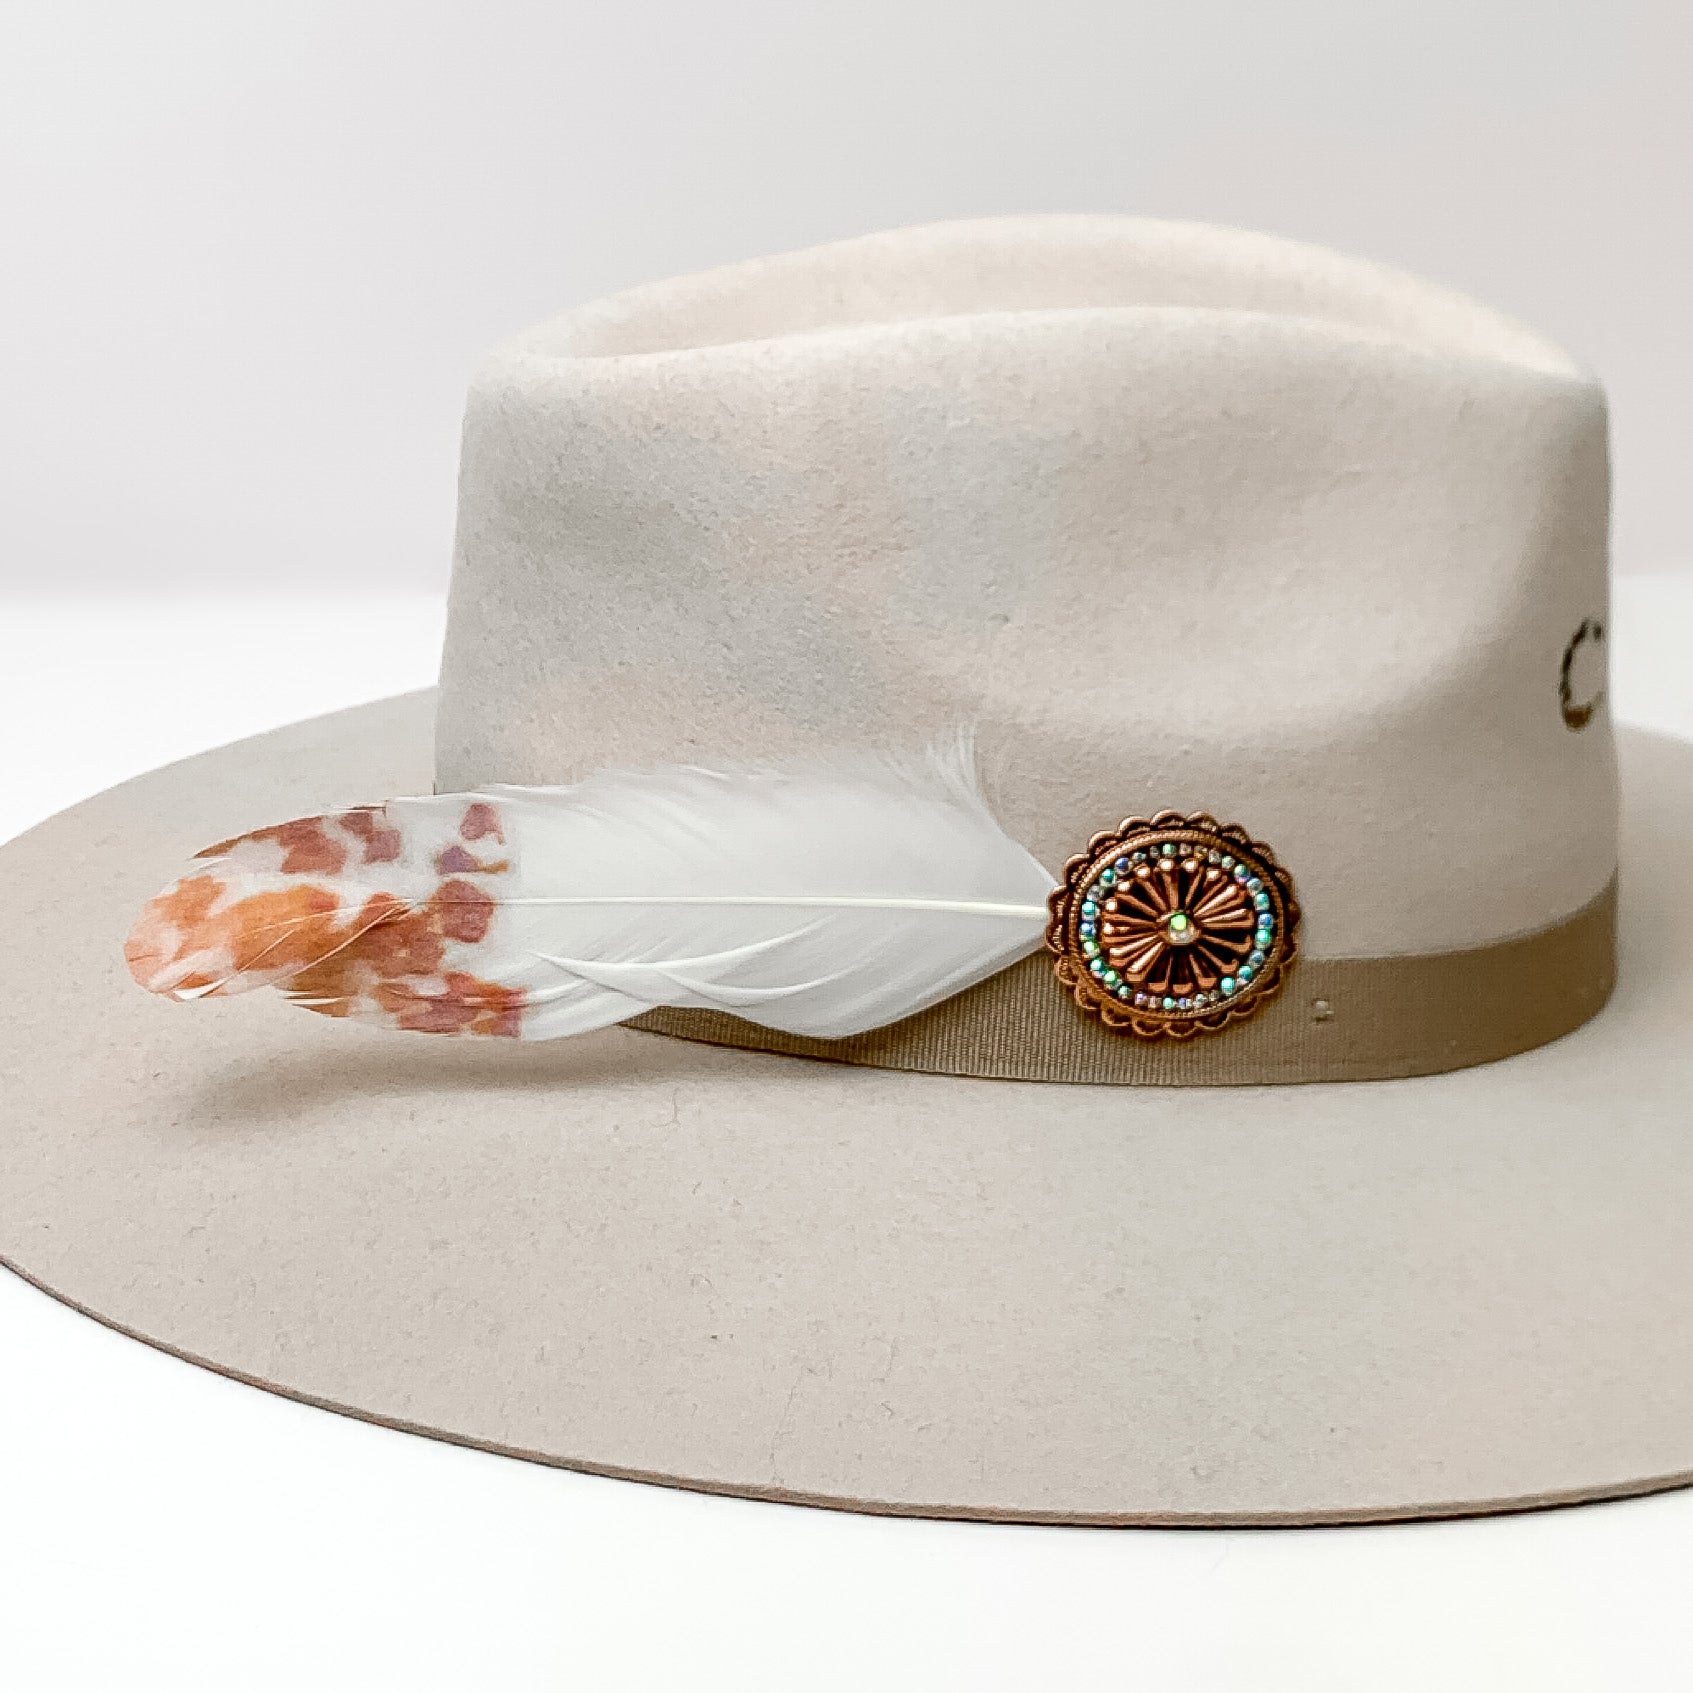 Oval Concho With white and orange Feathers Hat Pin With AB crystals. Pictured on a white background with the pin on the side of a light grey/ brown hat.